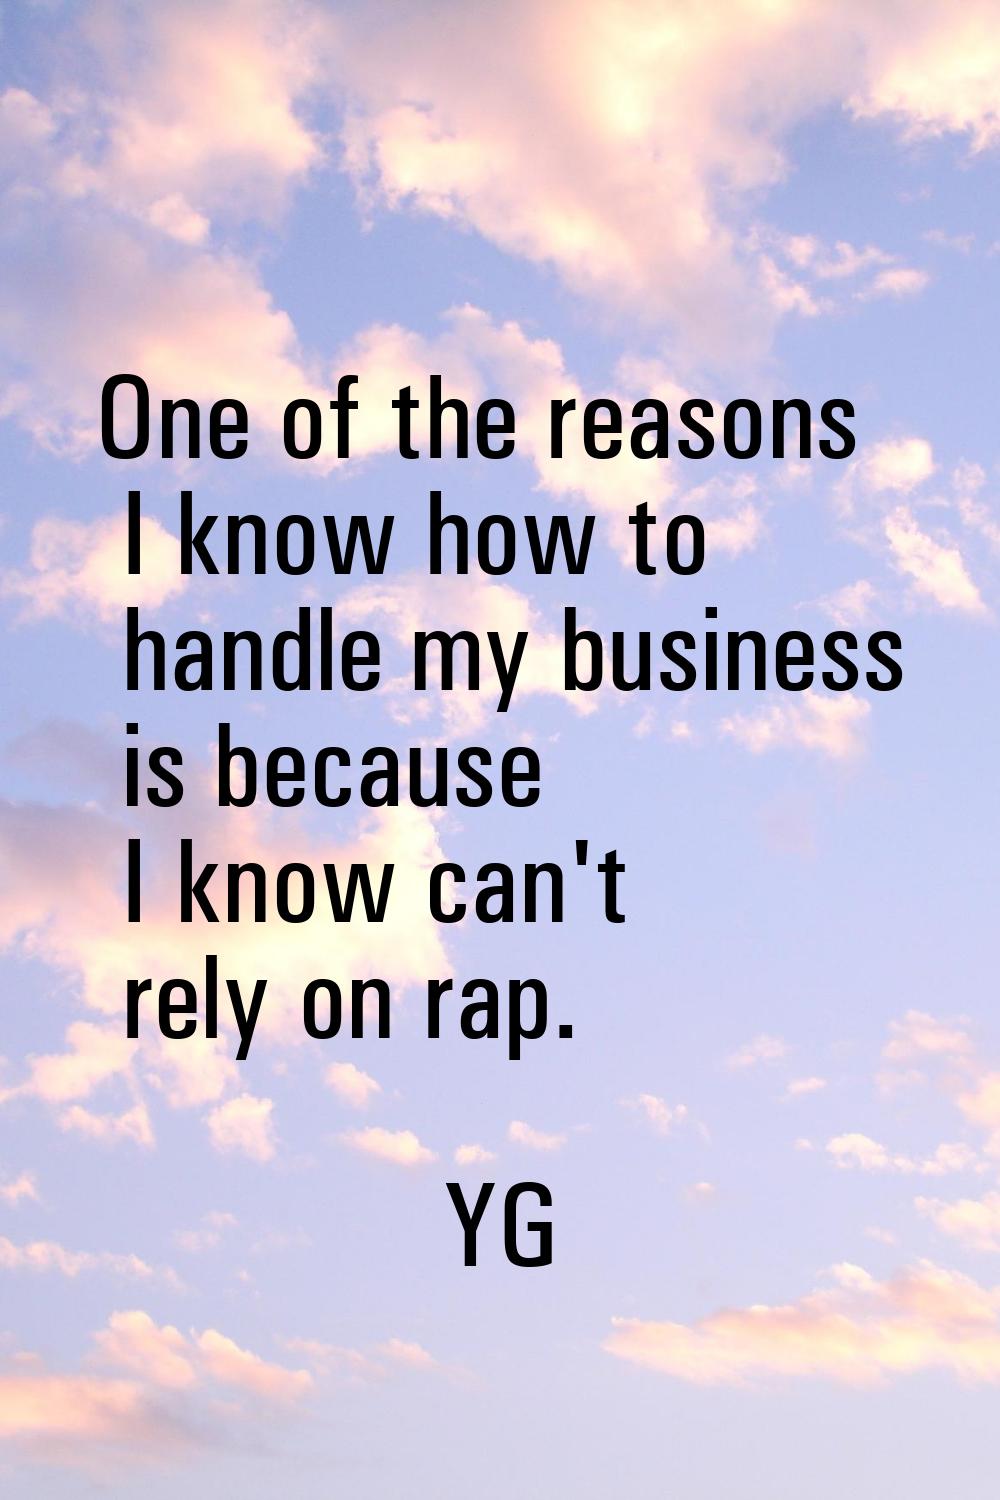 One of the reasons I know how to handle my business is because I know can't rely on rap.